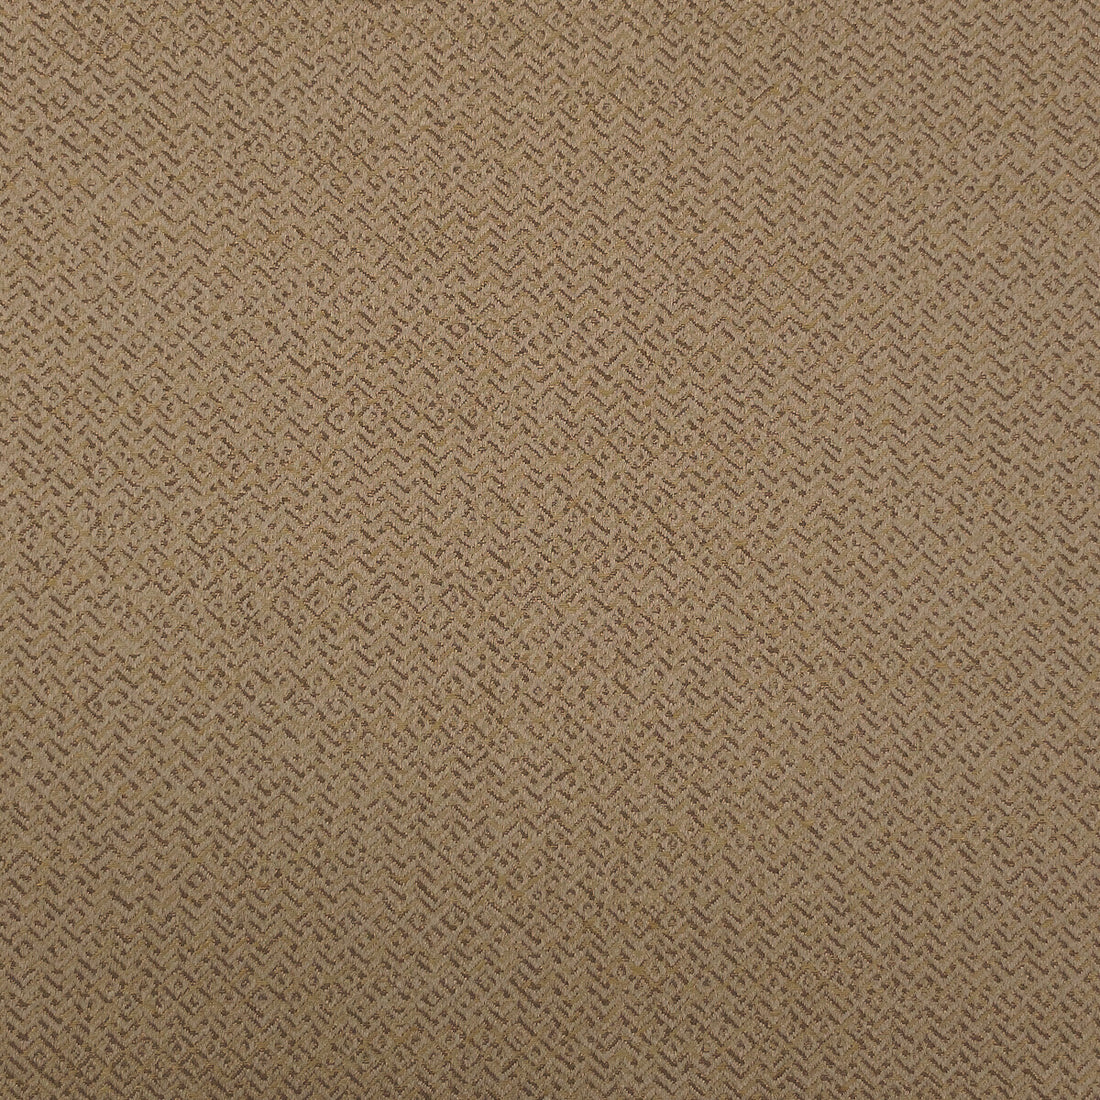 Kf Des fabric - pattern LZ-30203.05.0 - by Kravet Design in the Lizzo collection